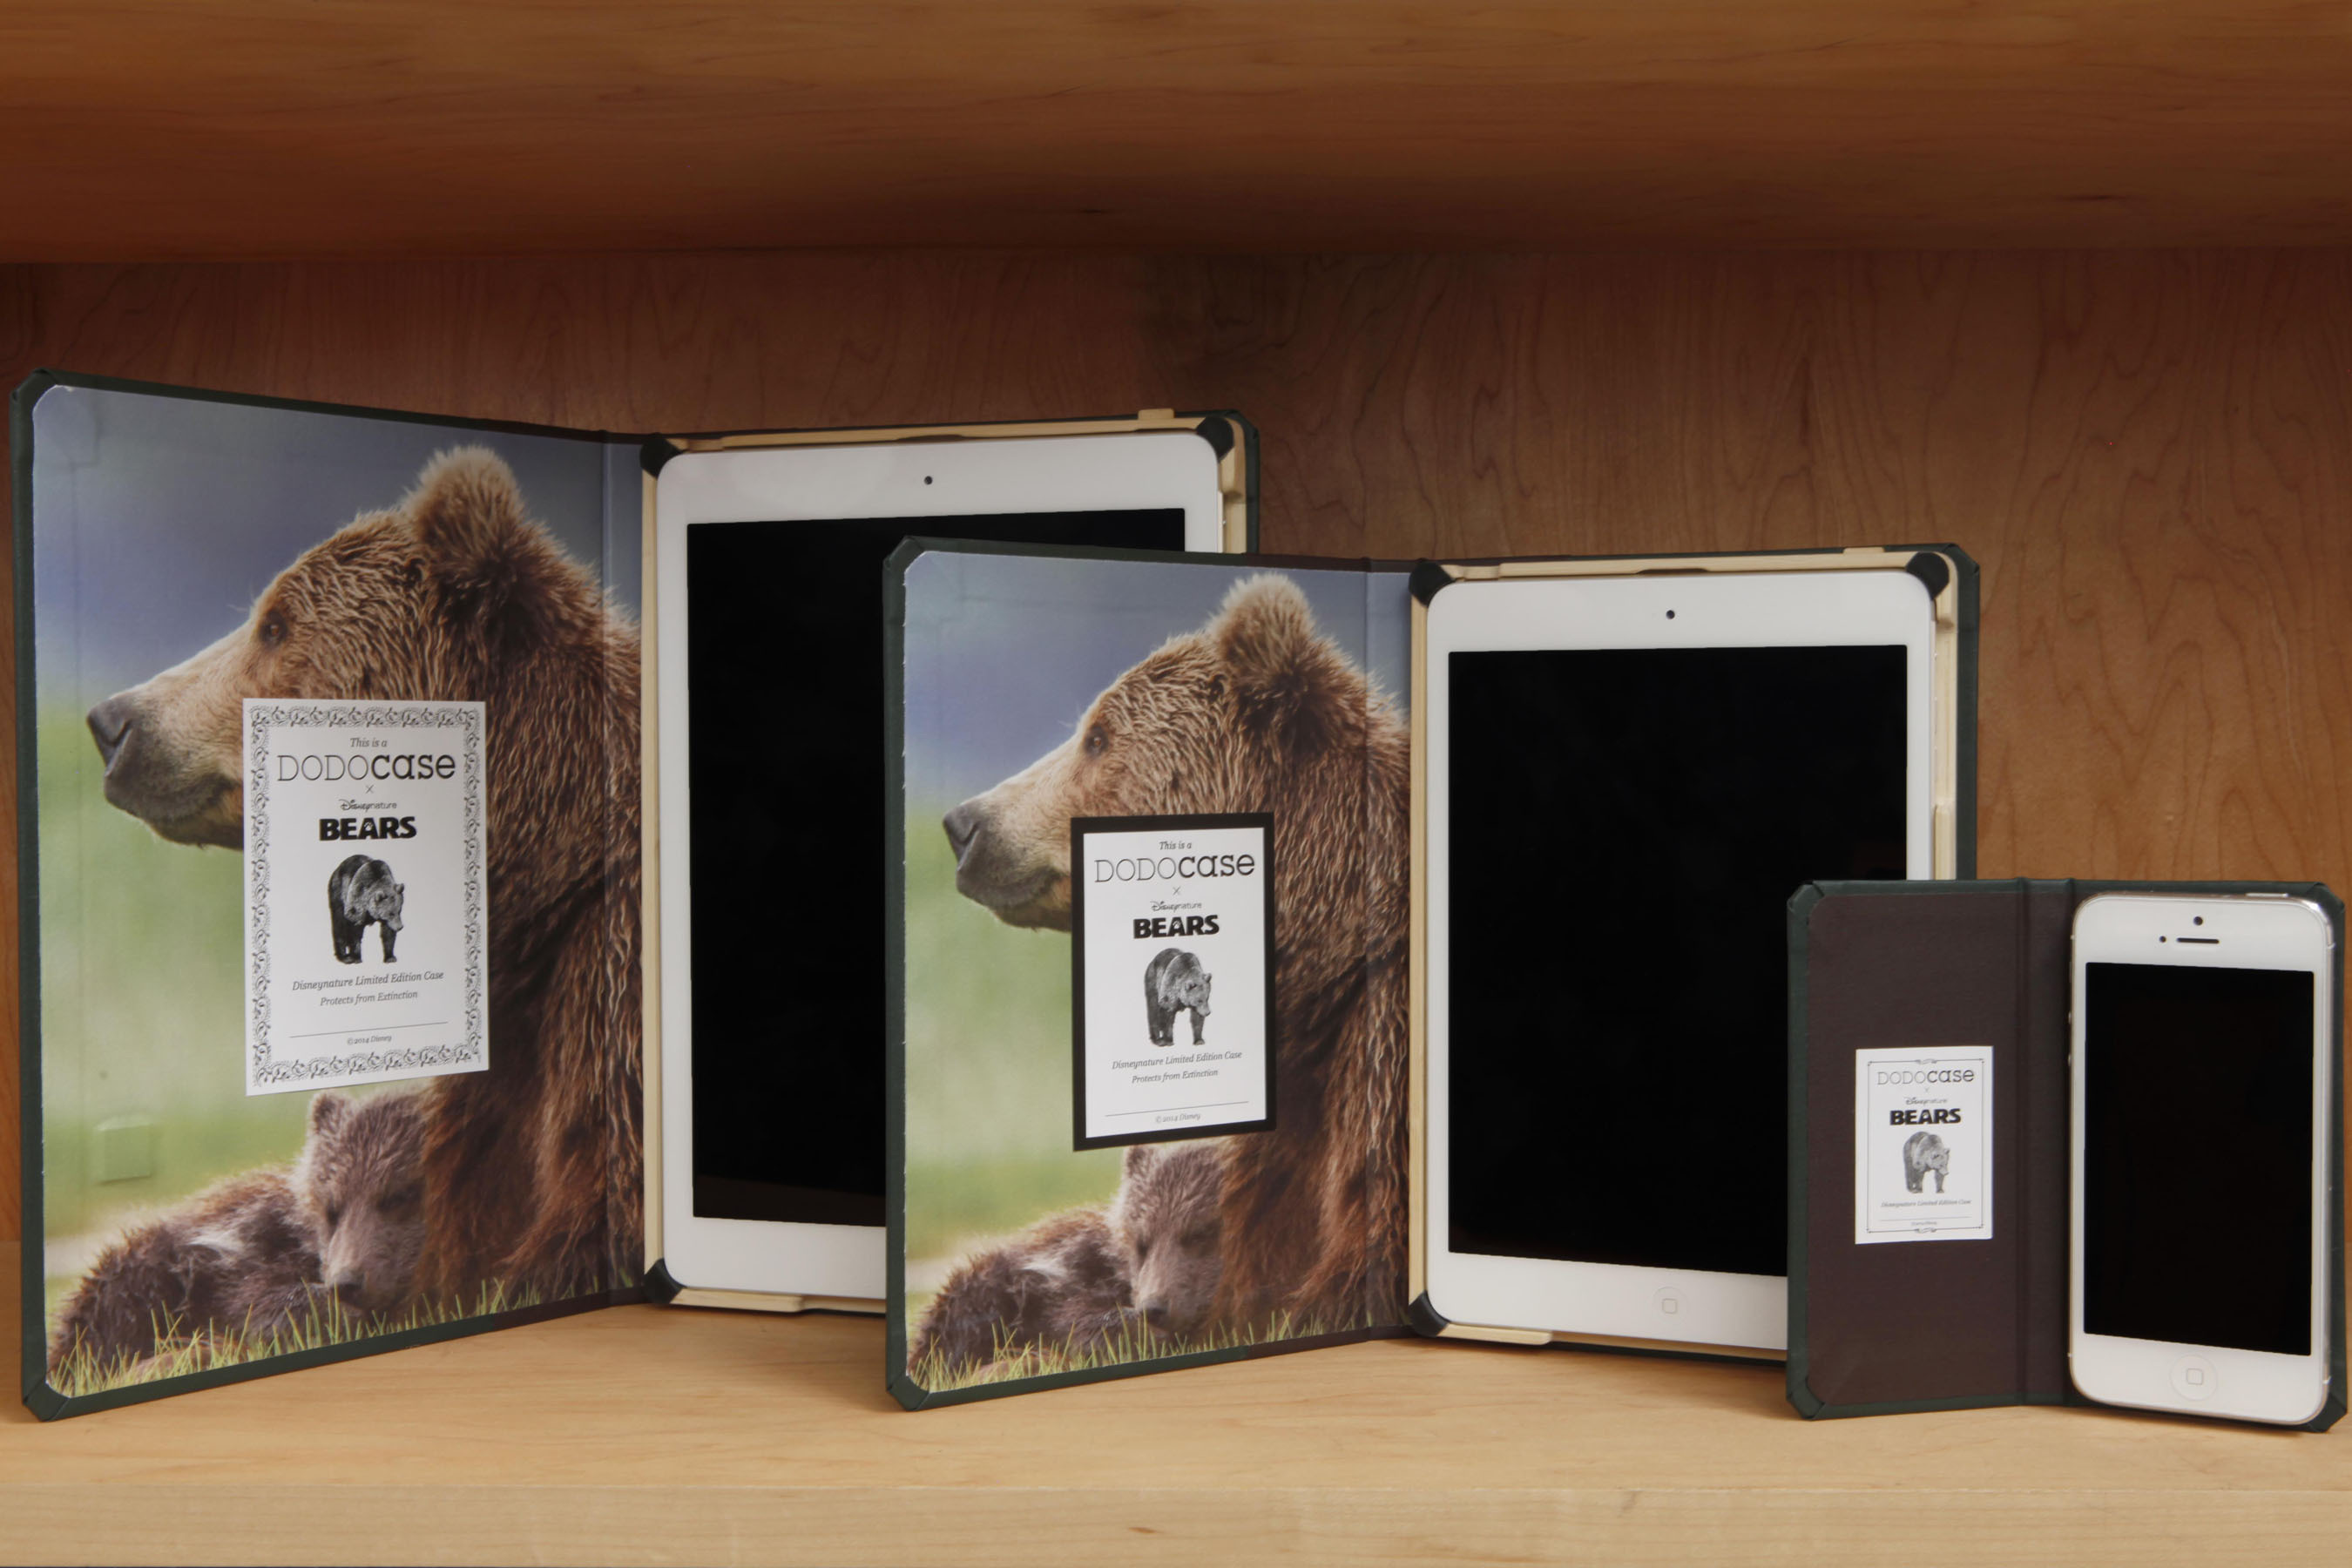 DODOcase Celebrates Earth Day with Limited-Edition Collection of Disneynature "Bears" Cases. DODOcase launches a line of custom designed iPad Air cases, iPad mini cases and iPhone 5/5S cases to support Disneynature's new big-screen adventure film "Bears" and the National Park Foundation. DODOcase will contribute 20% of every sale to the National Park Foundation. Visit www.dodocase.com for more information and to purchase your limited-edition Disneynature "Bears" case. (PRNewsFoto/DODOcase) (PRNewsFoto/DODOCASE)